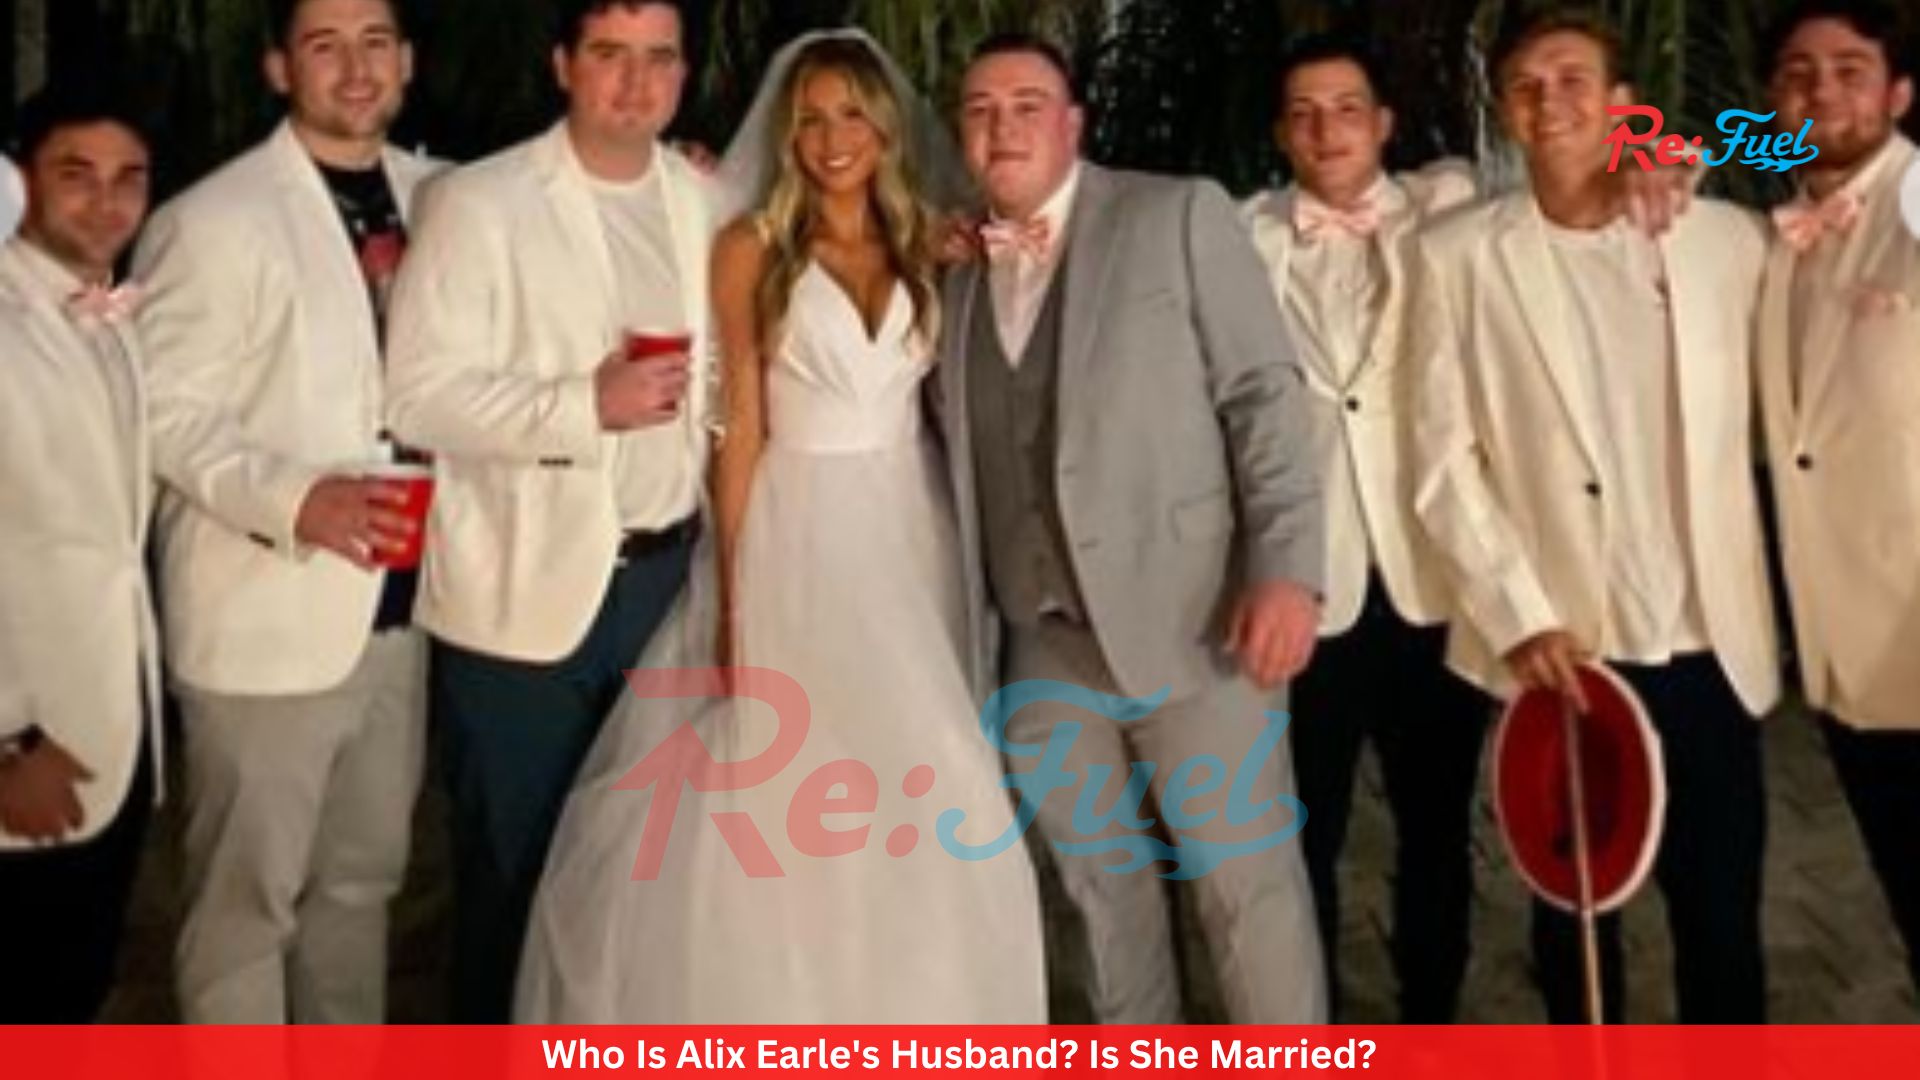 Who Is Alix Earle's Husband? Is She Married?